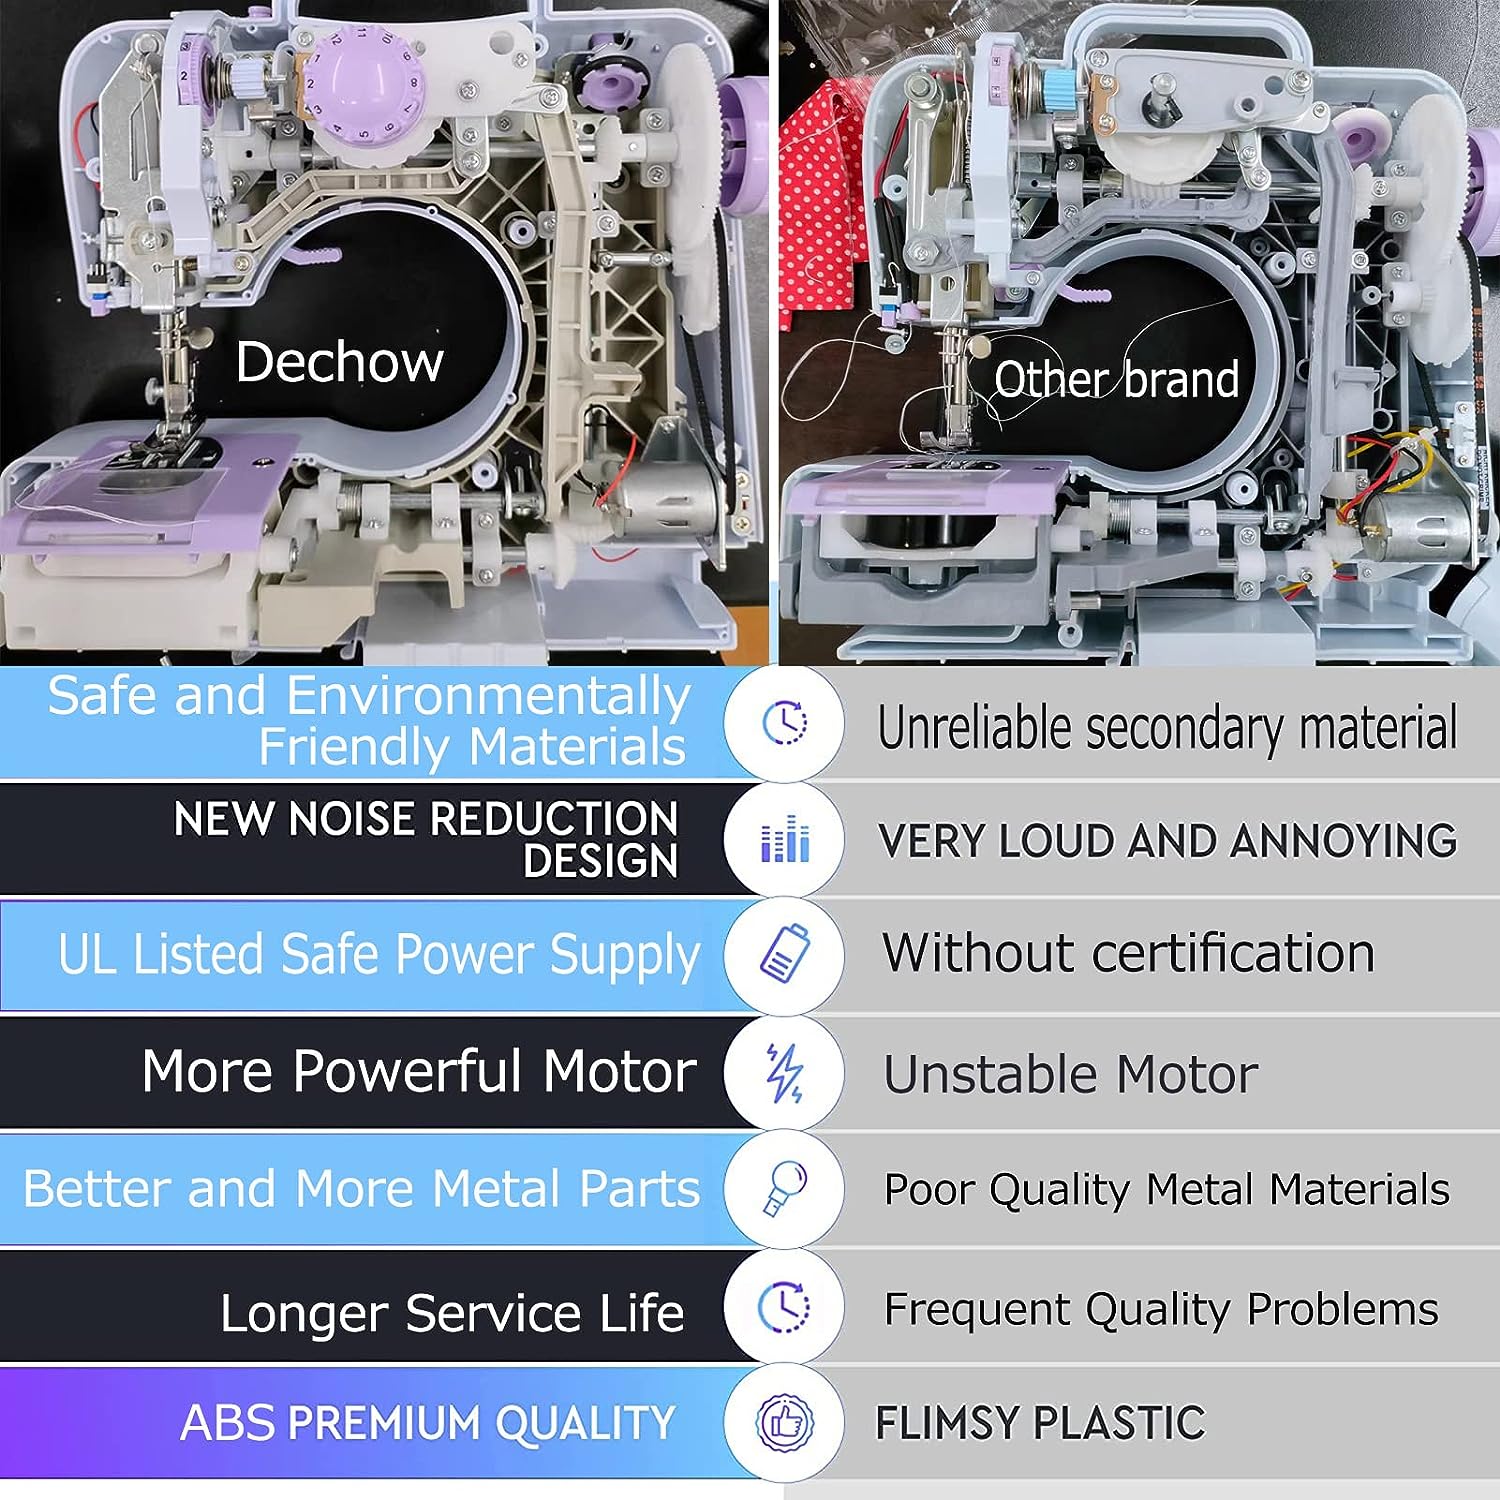 Dechow Sewing Machine for Beginners, Electric Mini Portable, 12 Built-in  Stitches with Reverse Sewing, 2 Speeds Double Thread with Foot Pedal,  Floral Cotton Fabric and Sewing Threads Set(Purple)